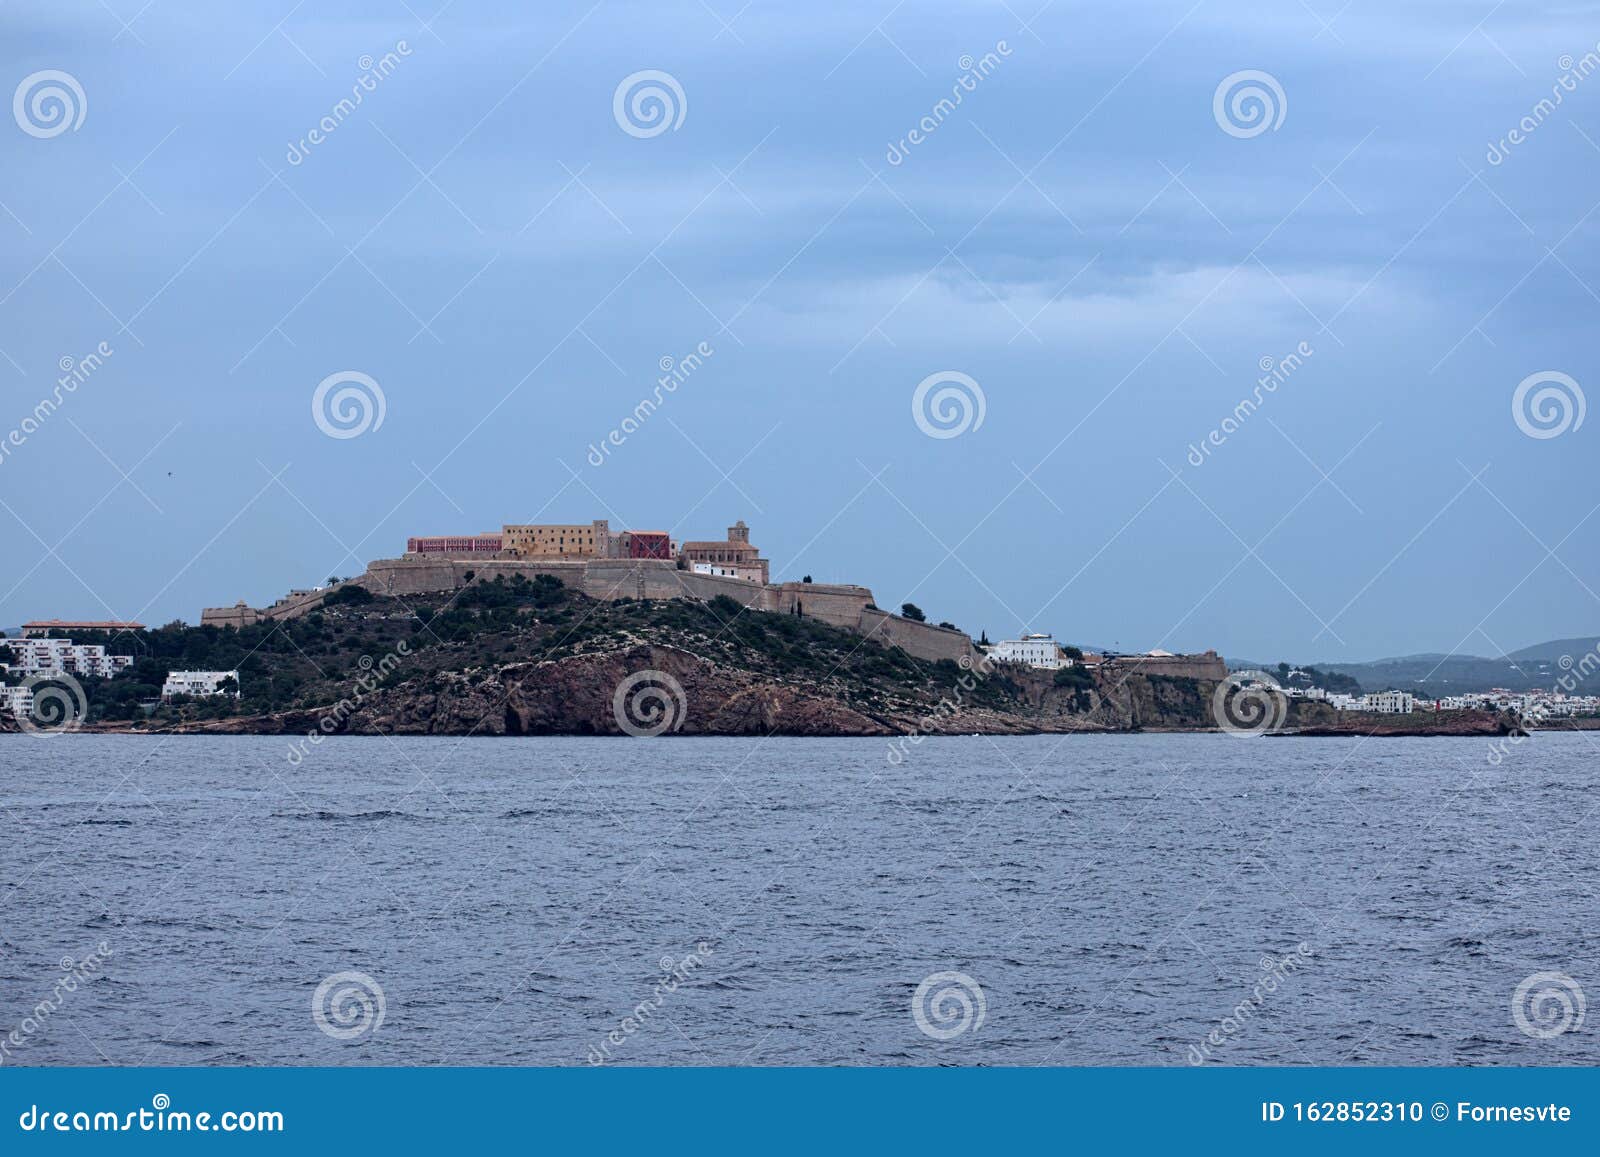 fortress and city of ibiza, spain